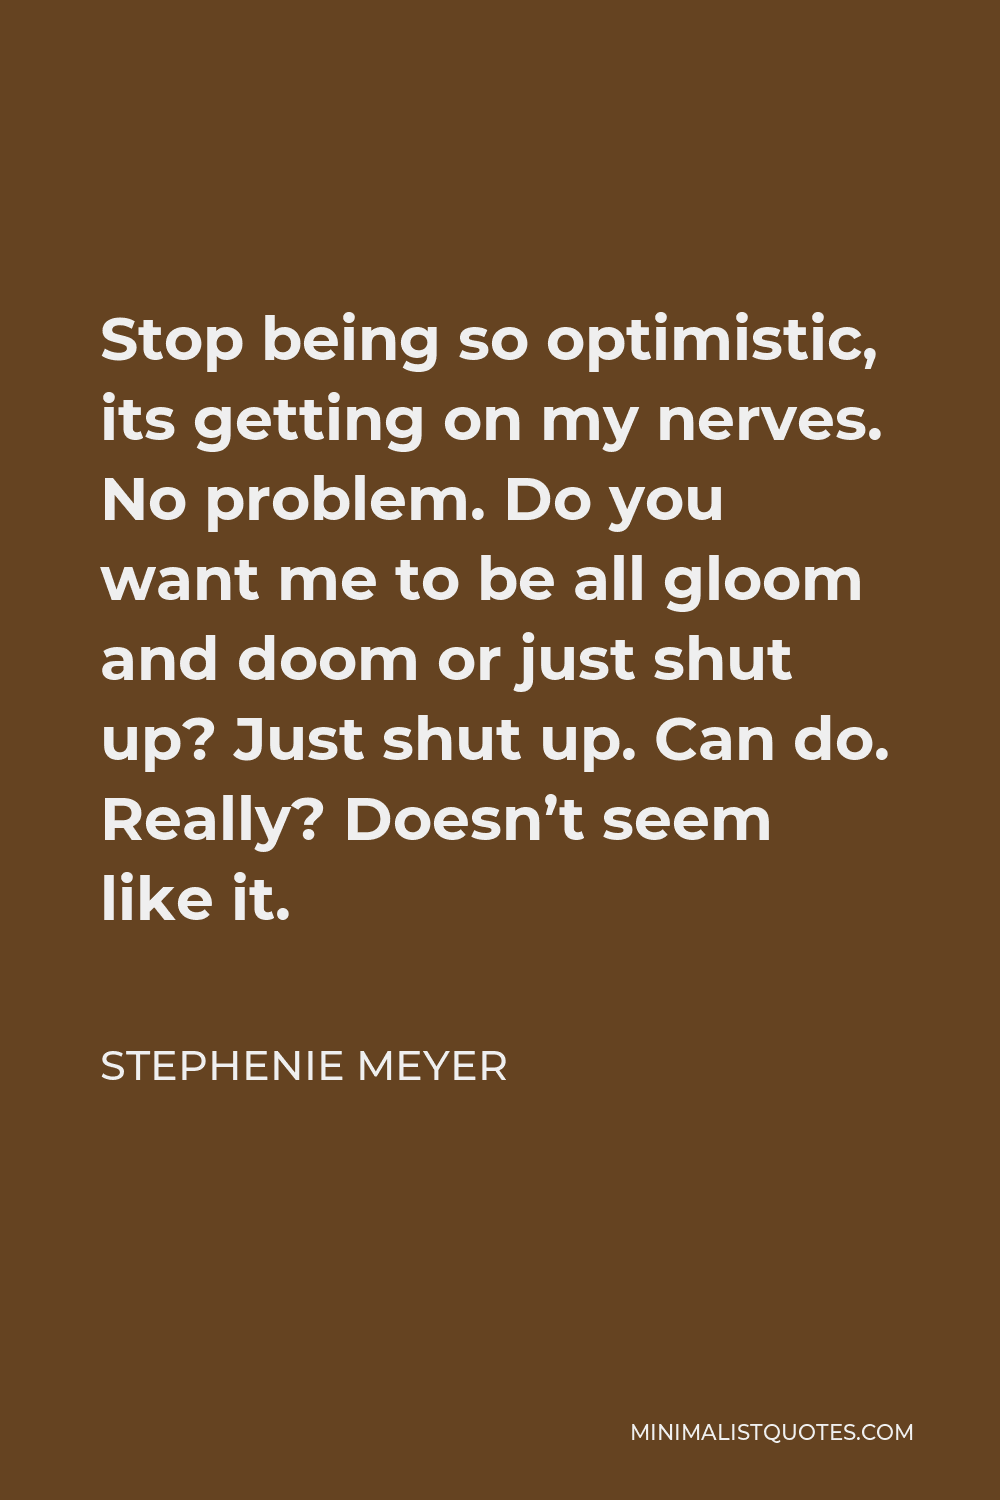 Stephenie Meyer Quote - Stop being so optimistic, its getting on my nerves. No problem. Do you want me to be all gloom and doom or just shut up? Just shut up. Can do. Really? Doesn’t seem like it.